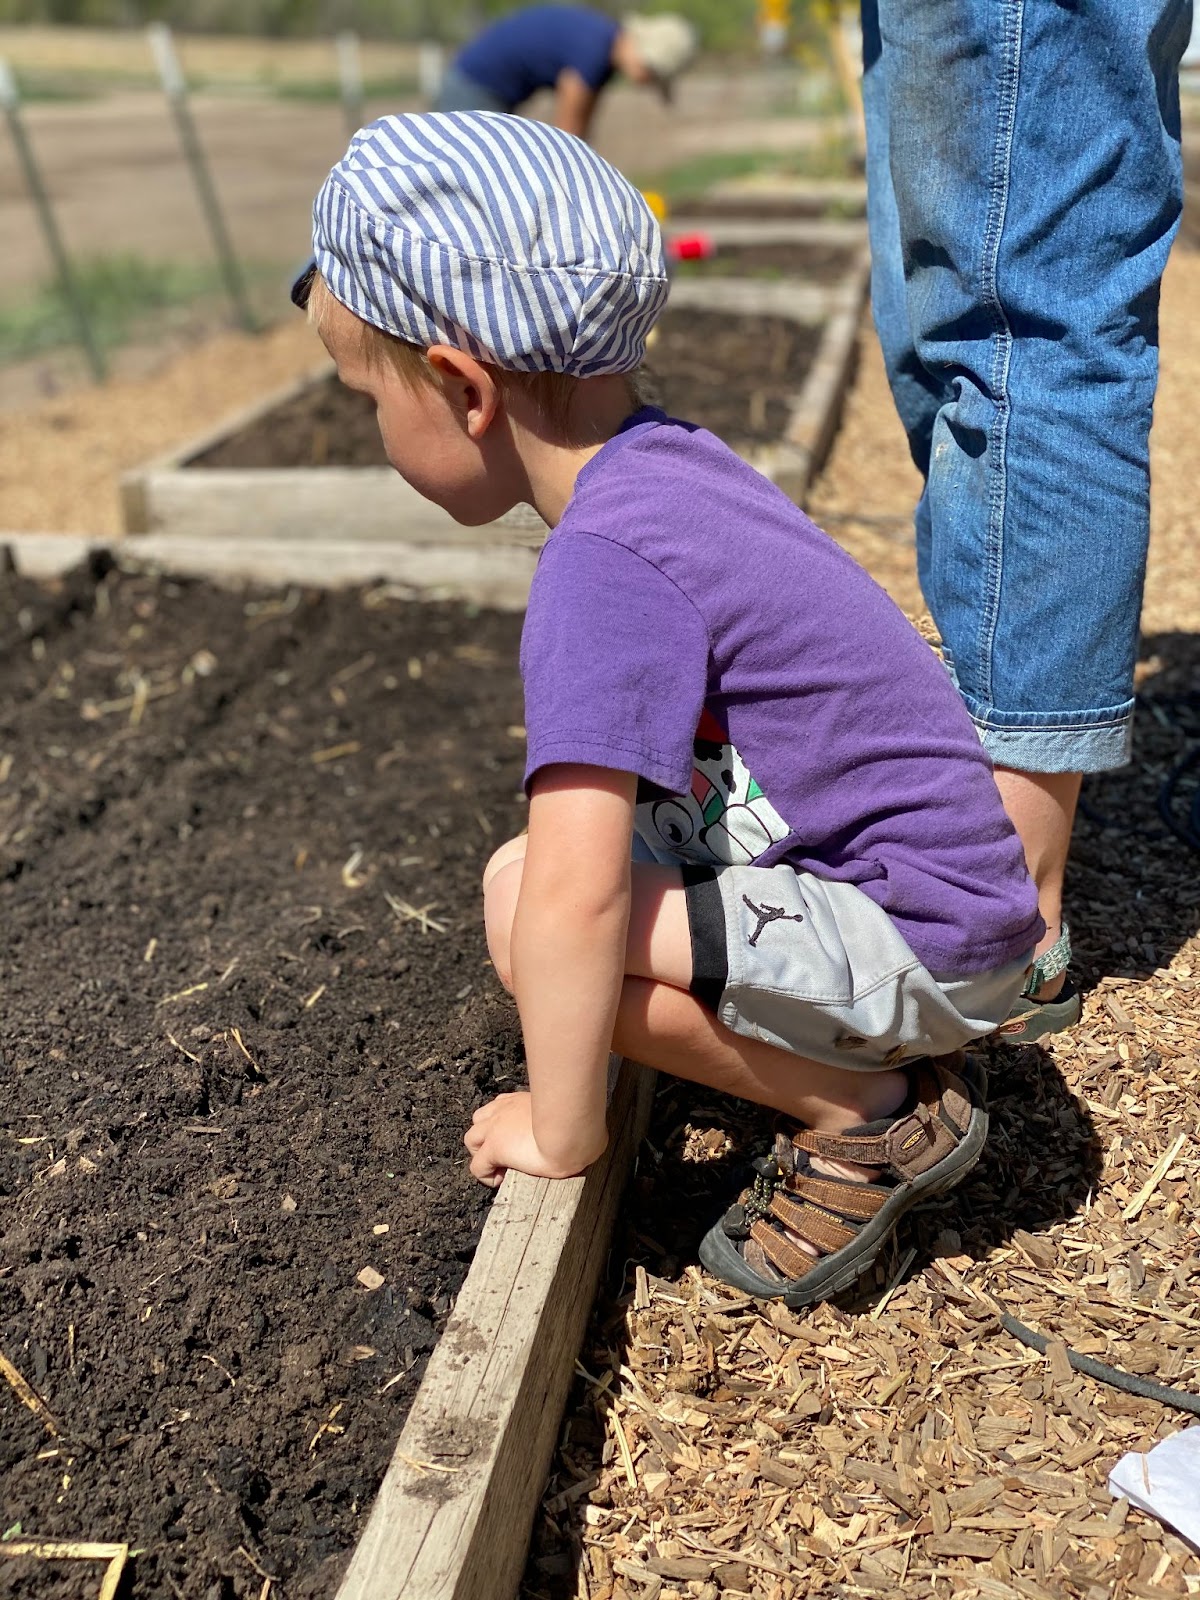 Young boy in purple shirt looks at a freshly tilled garden box